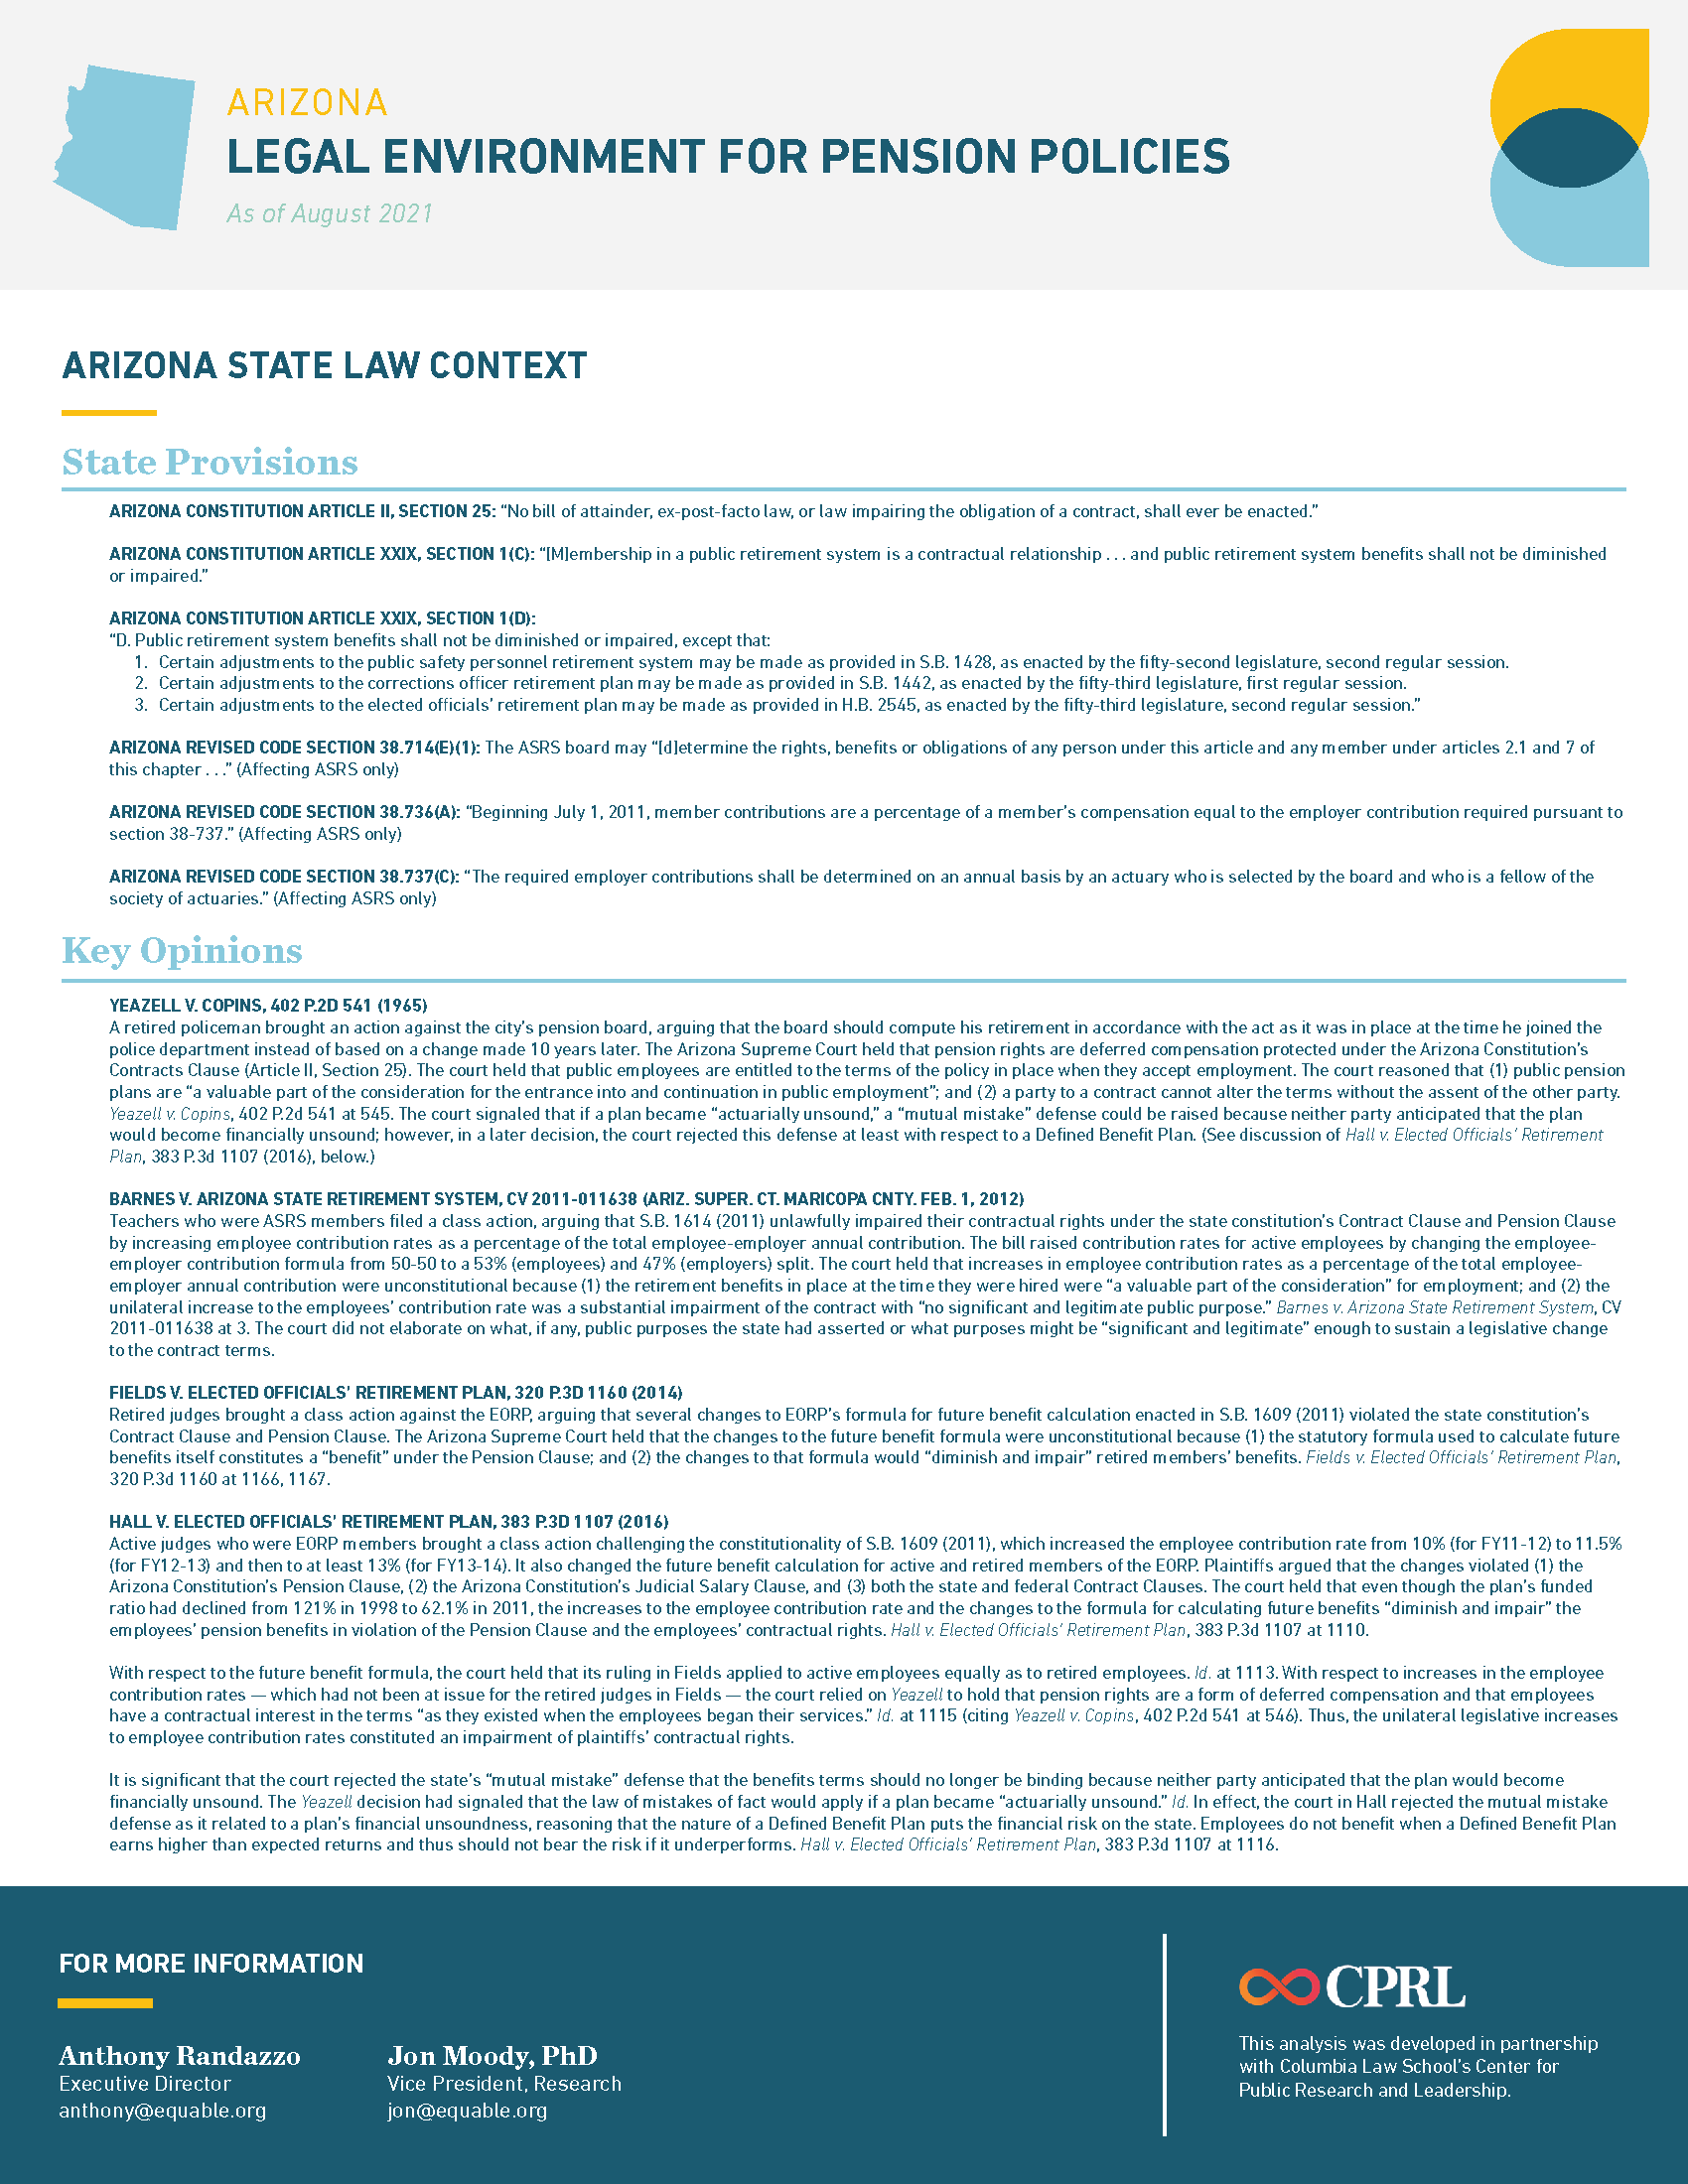 Arizona Pension Laws Infographic - Page 2